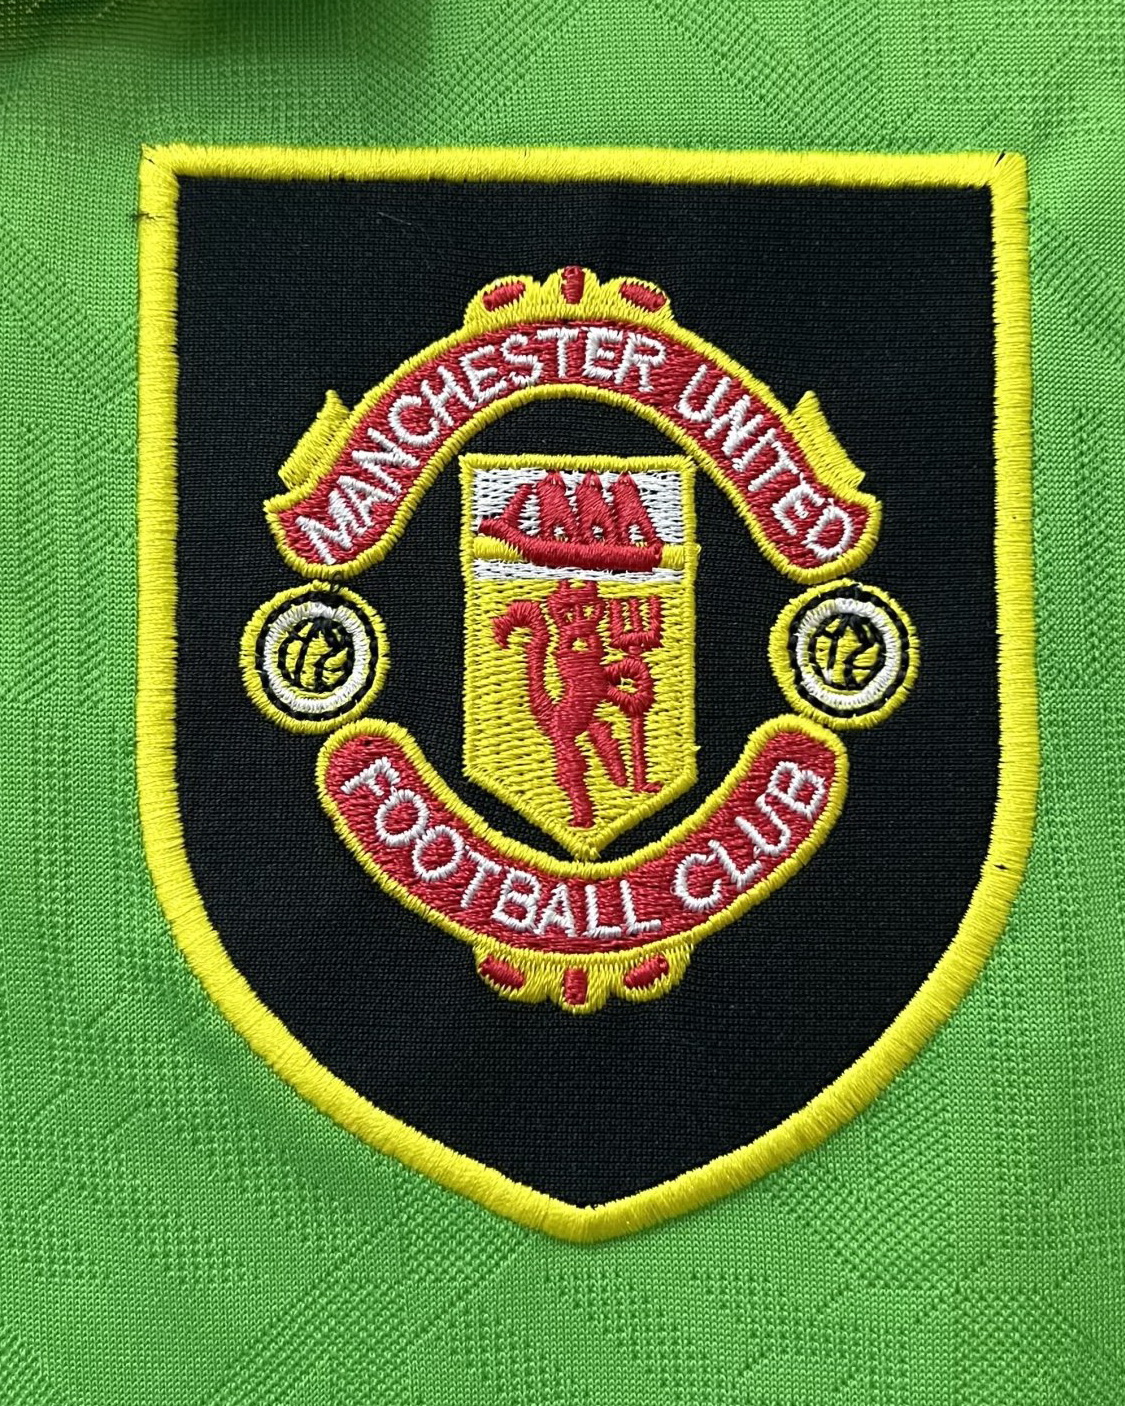 Manchester United 1992/94 Yellow/Green Jersey